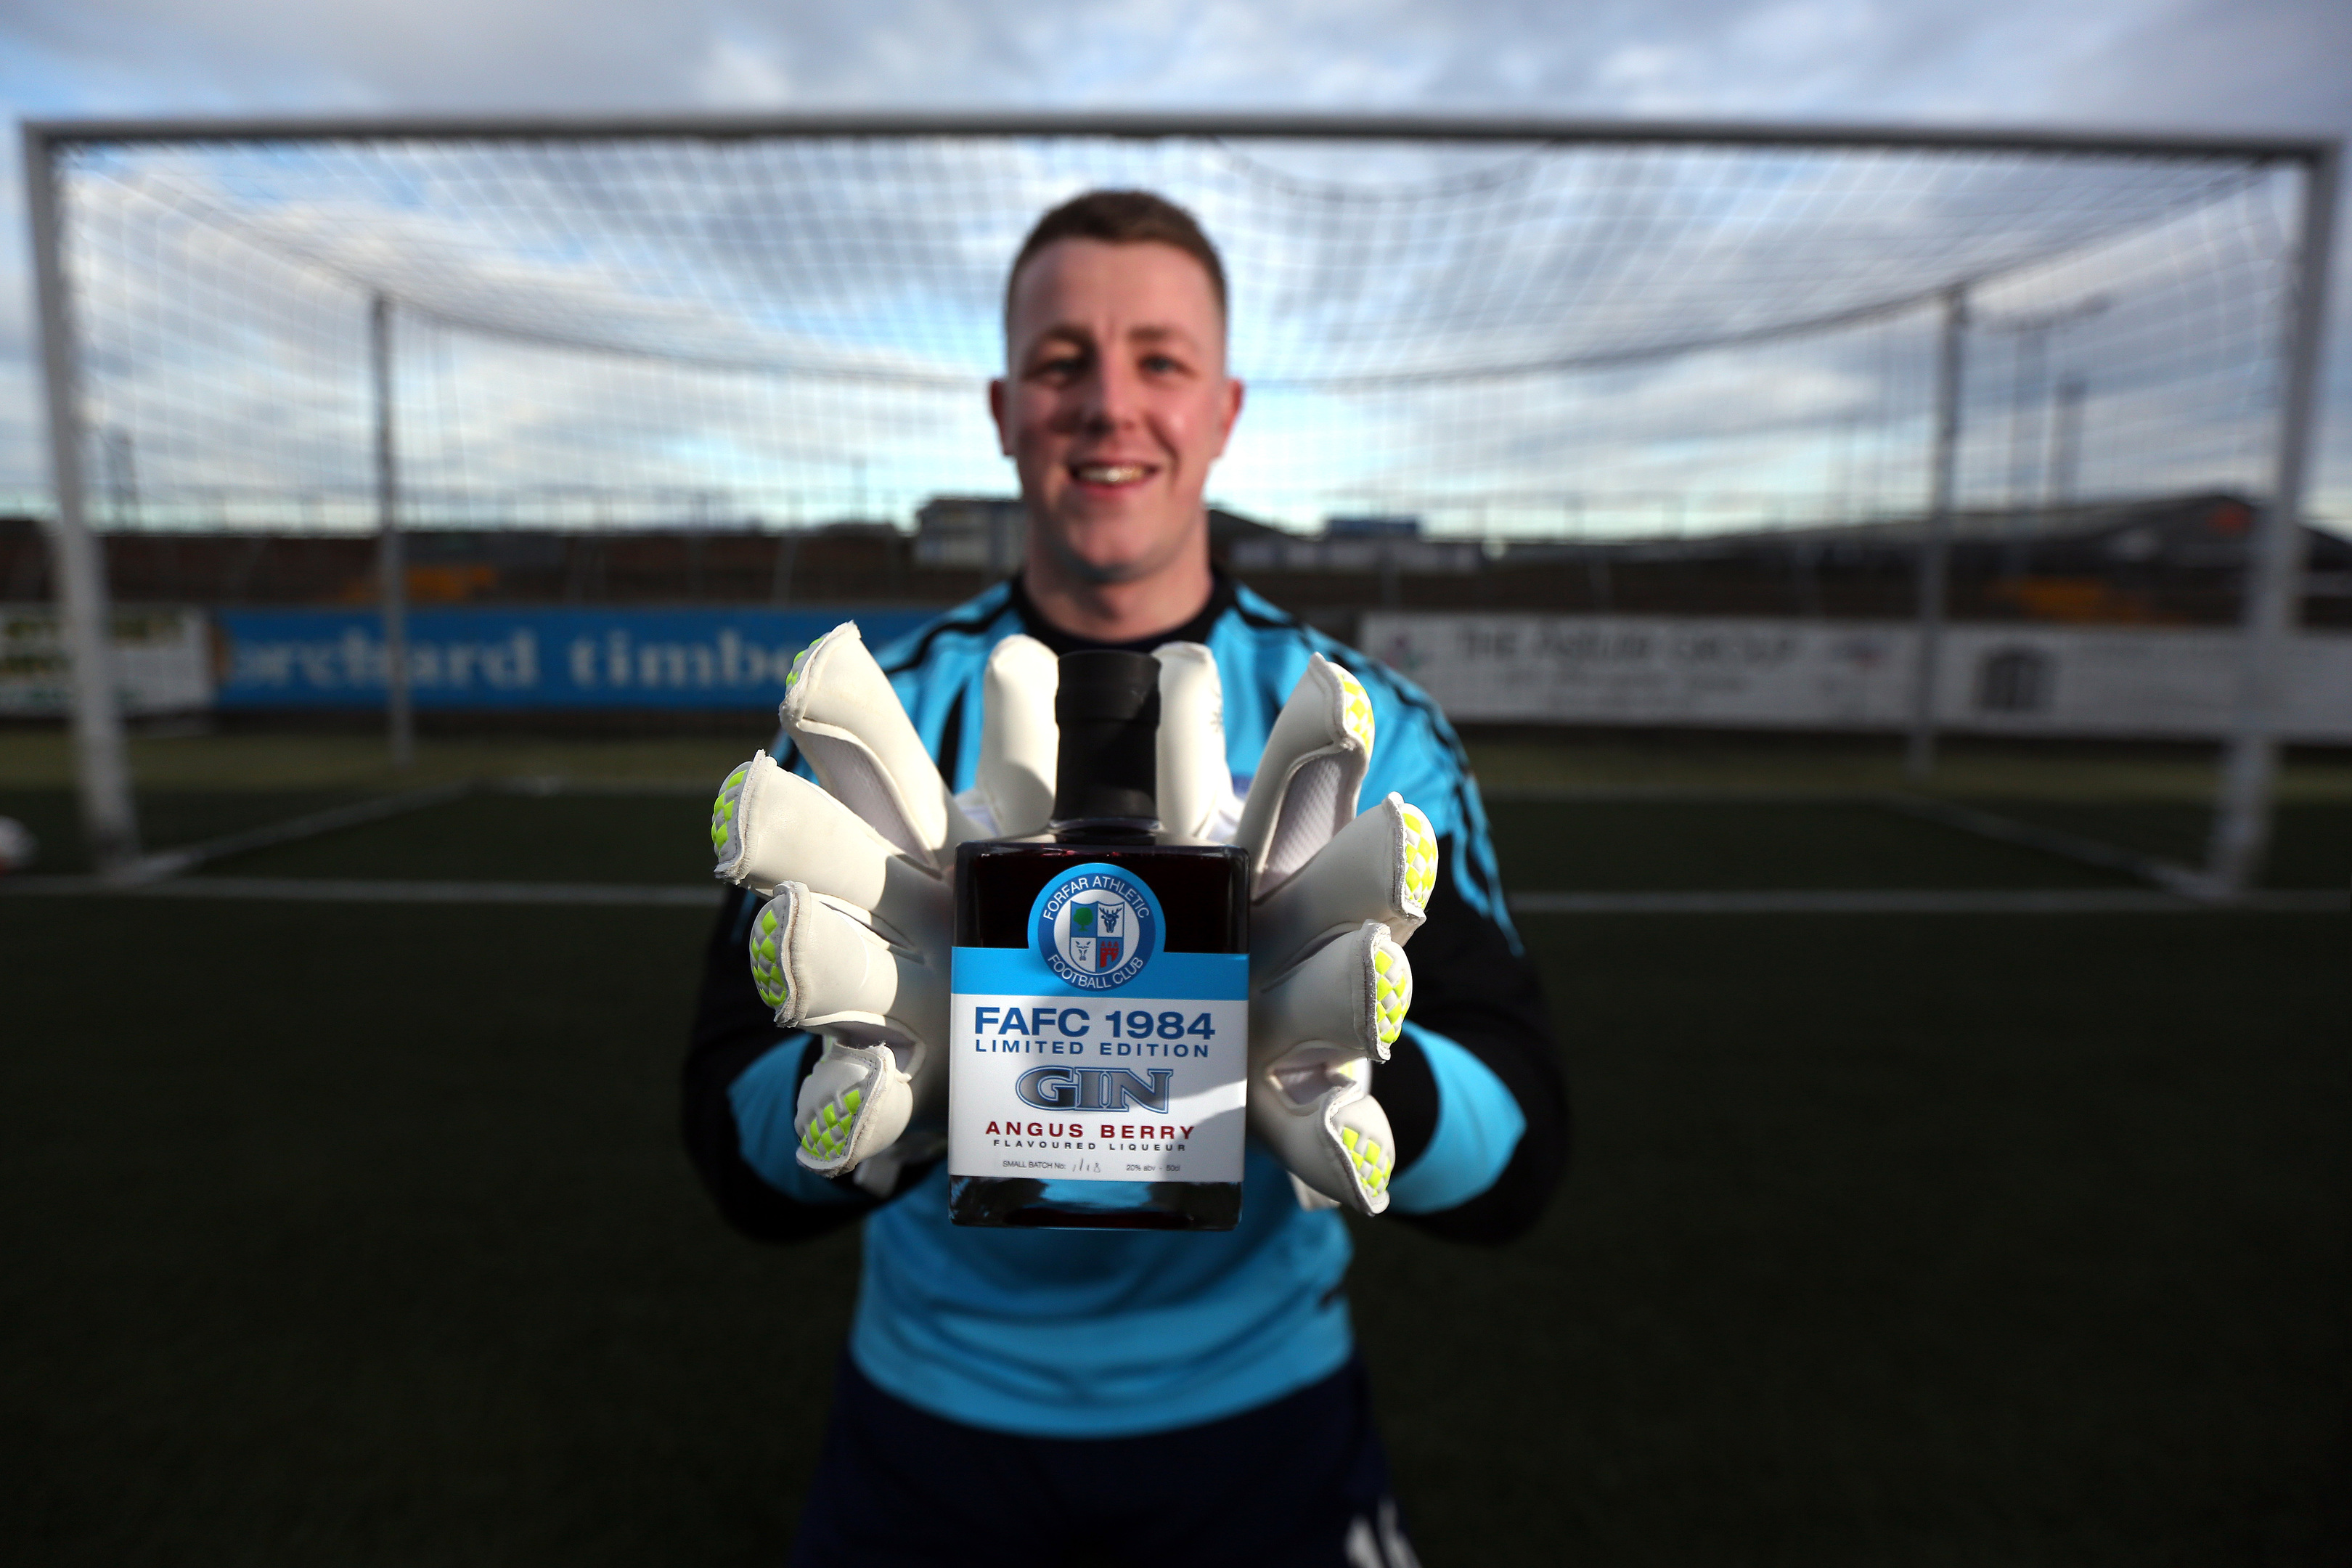 Forfar Athletic 'keeper Marc McCallum gets his hands on a bottle of the FAFC 1984 limited edition gin during a training session at Station Park.